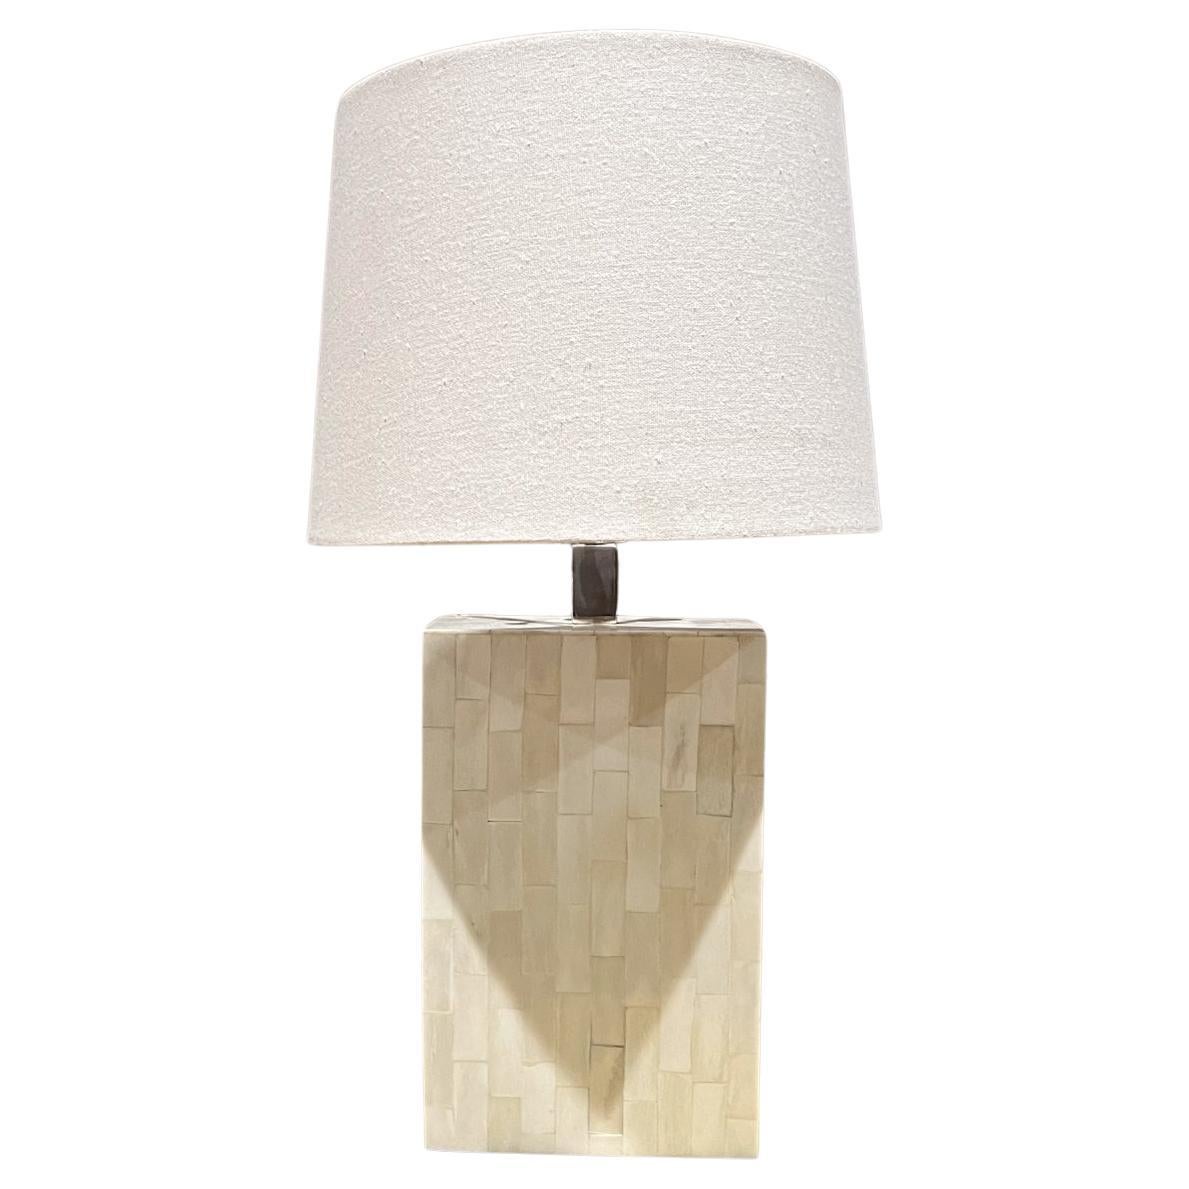 1970s Tessellated Bone Table Lamp Enrique Garcel Colombia